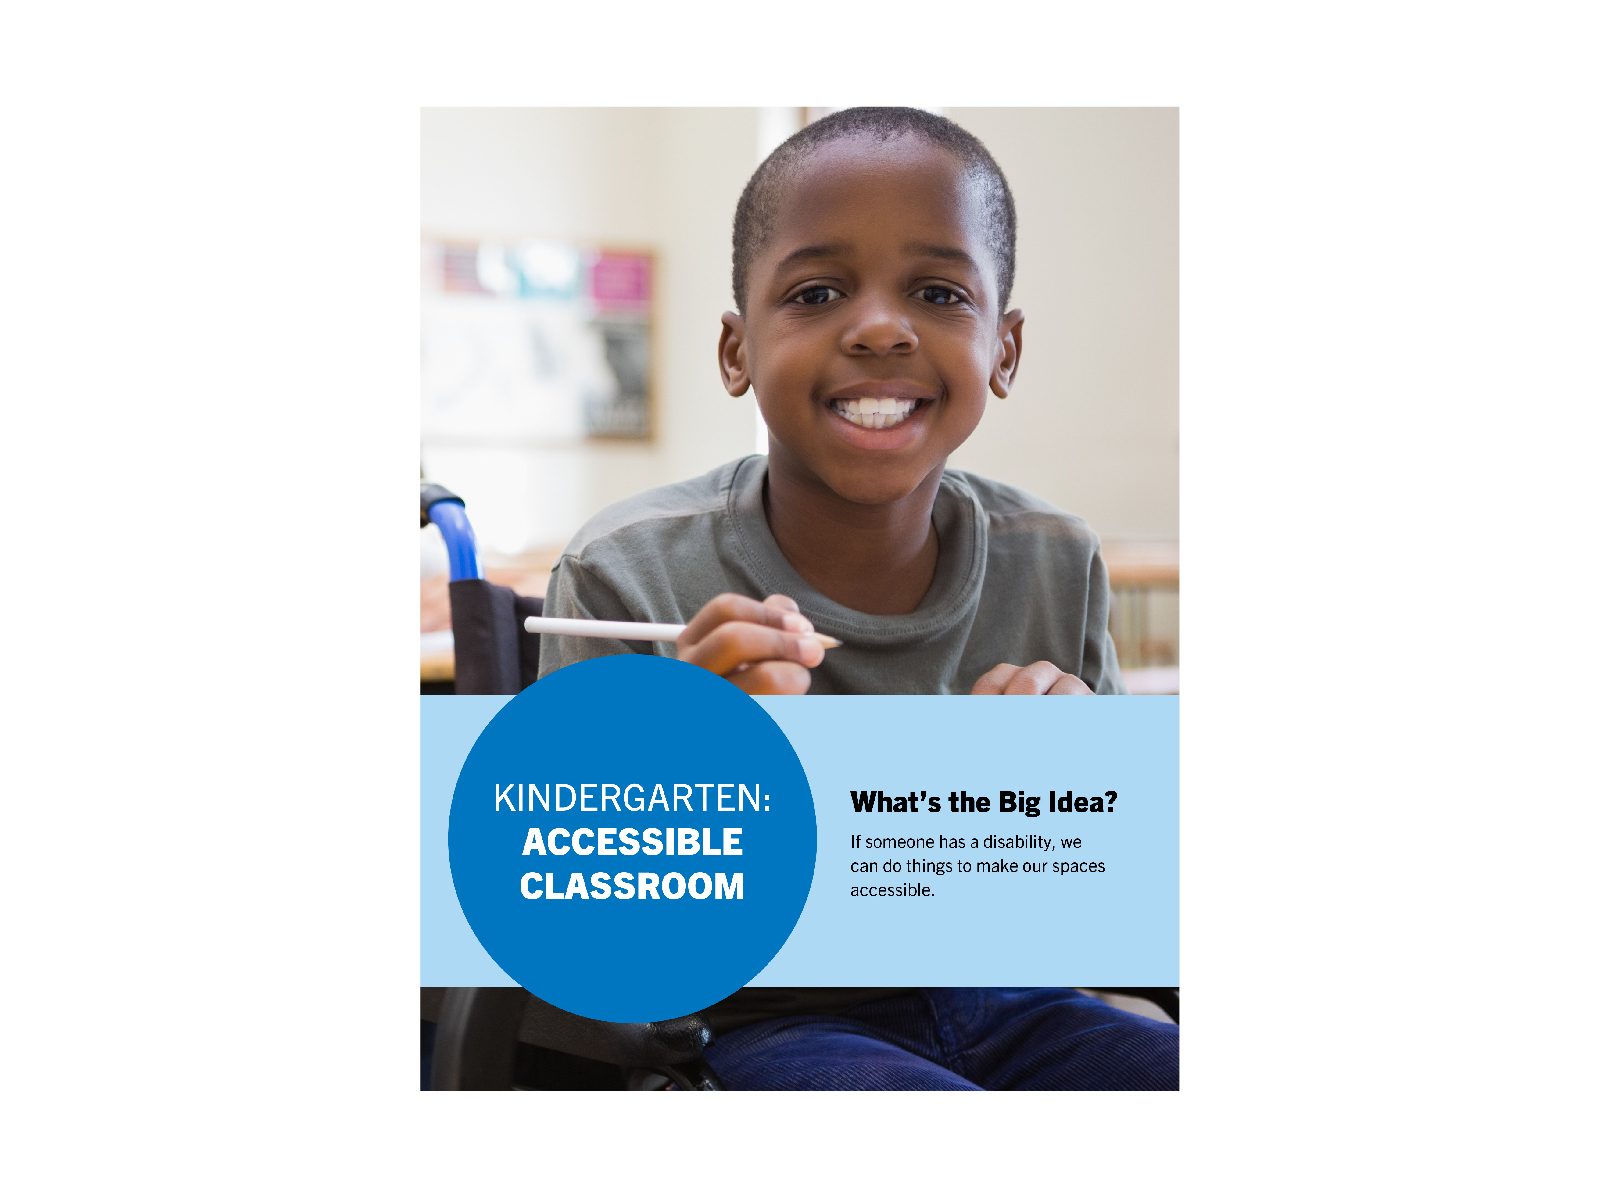 Elementary-aged boy using a wheelchair smiling while holding a pencil in a classroom. Cover of "Accessible Classroom" lesson.